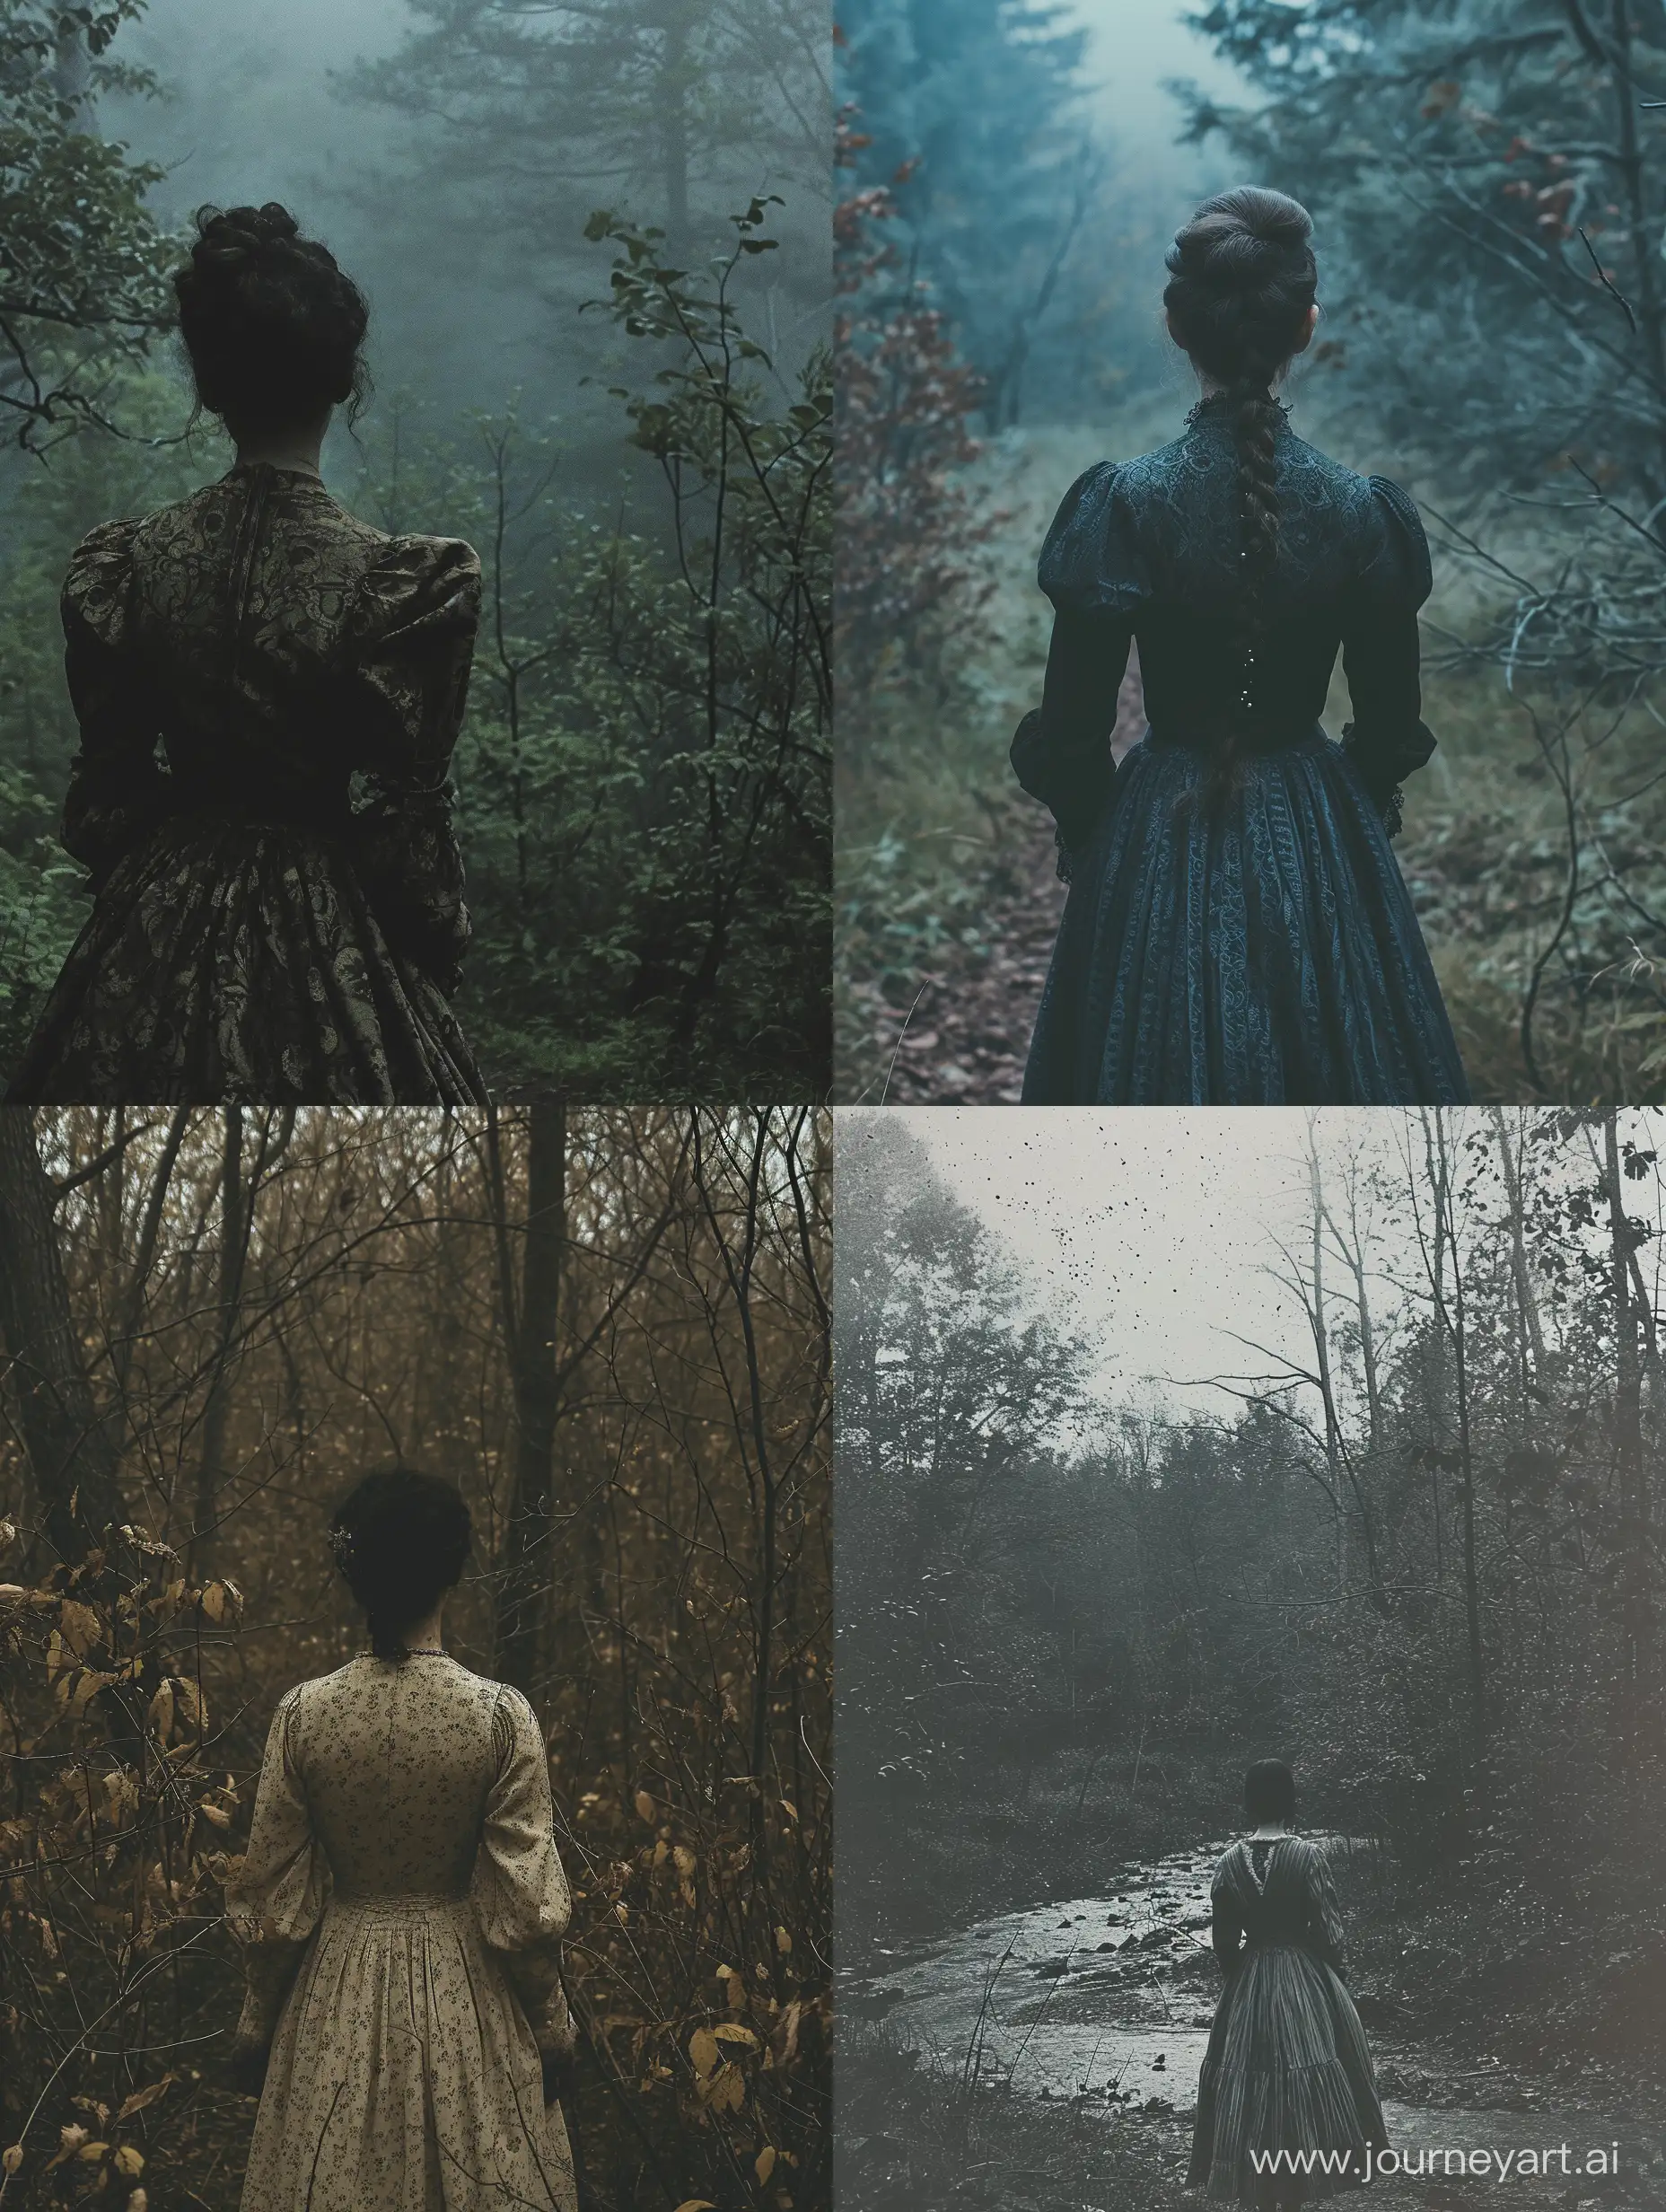 Very saturated photo that evokes folk horror, featuring a person in a vintage dress and a mysterious forest, the_ritual, creepypasta, folk horror, dark aesthetic, dark folk, dark magic, witch core, pagan horror